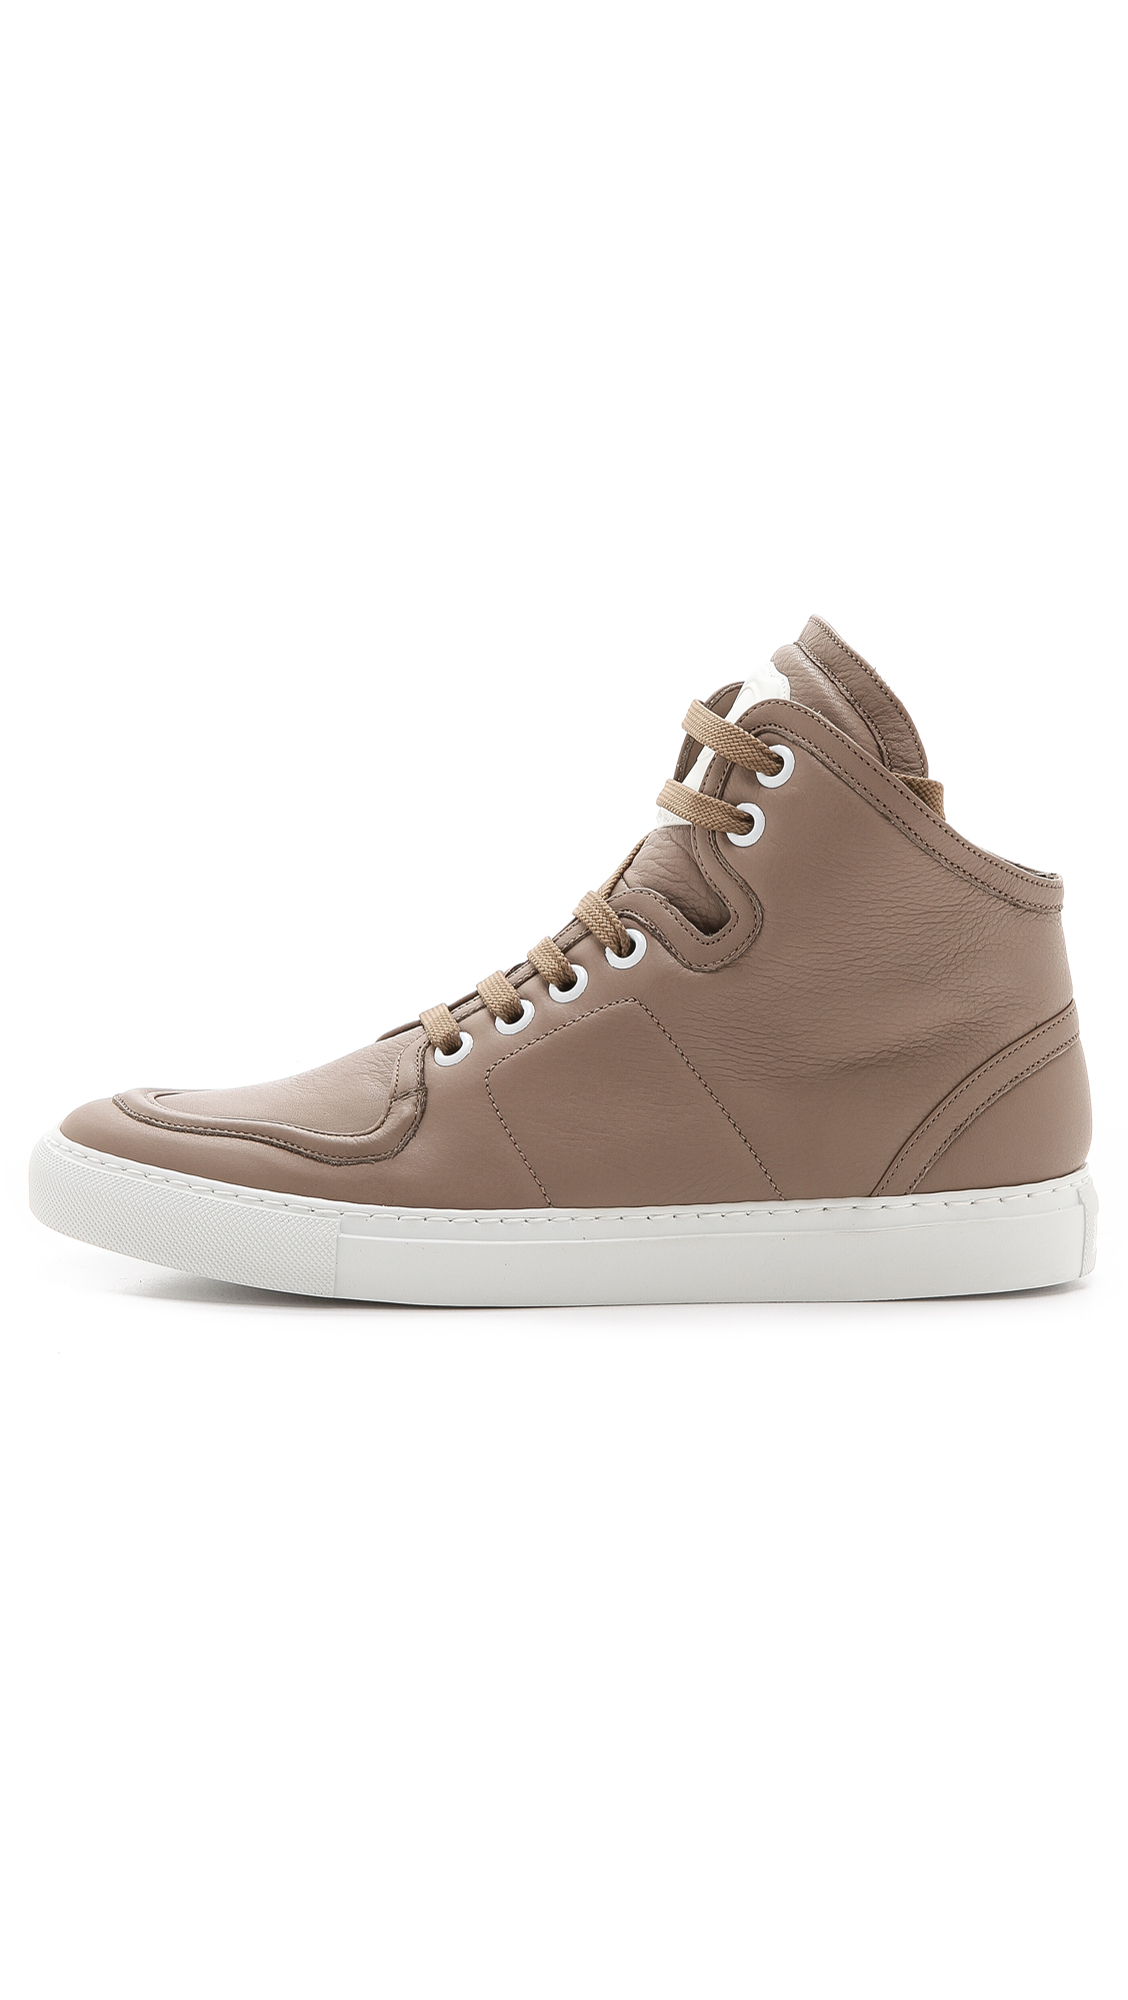 Lyst - Viktor & Rolf Leather High Top Sneakers in Brown for Men